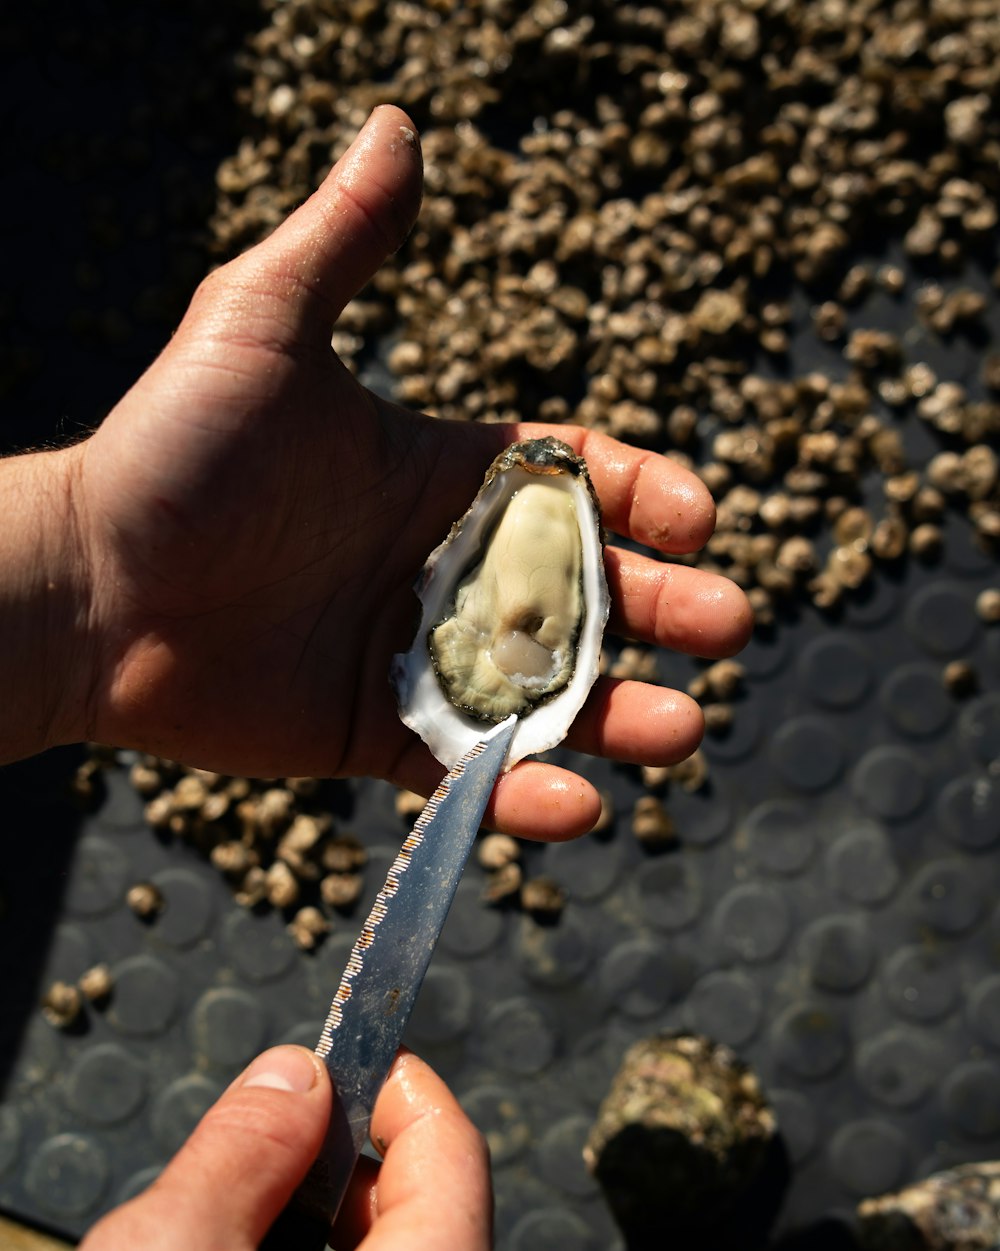 a person holding a knife and a half eaten oyster